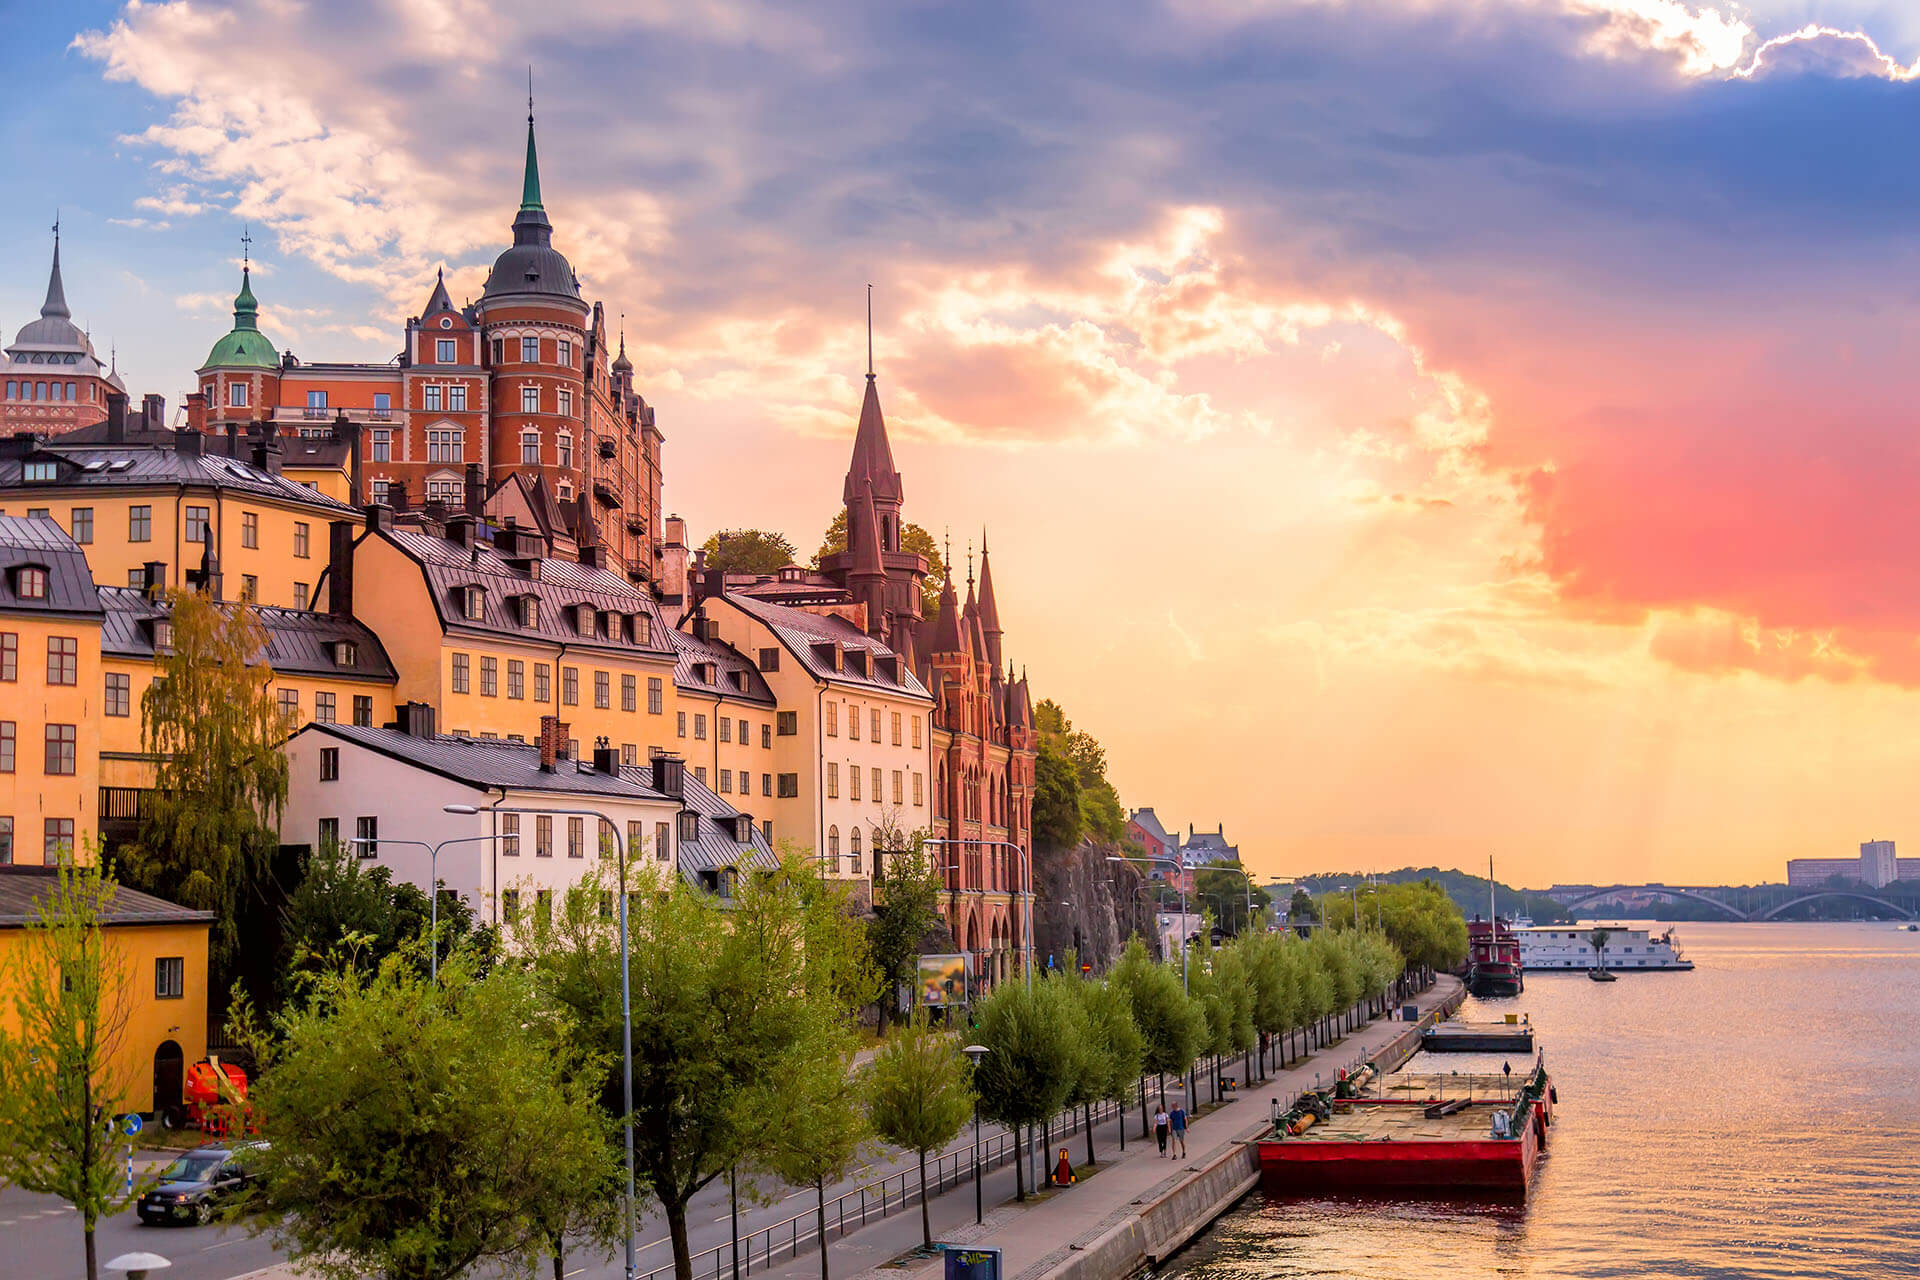 Sweden: Updated Salary Requirements for Foreign Nationals